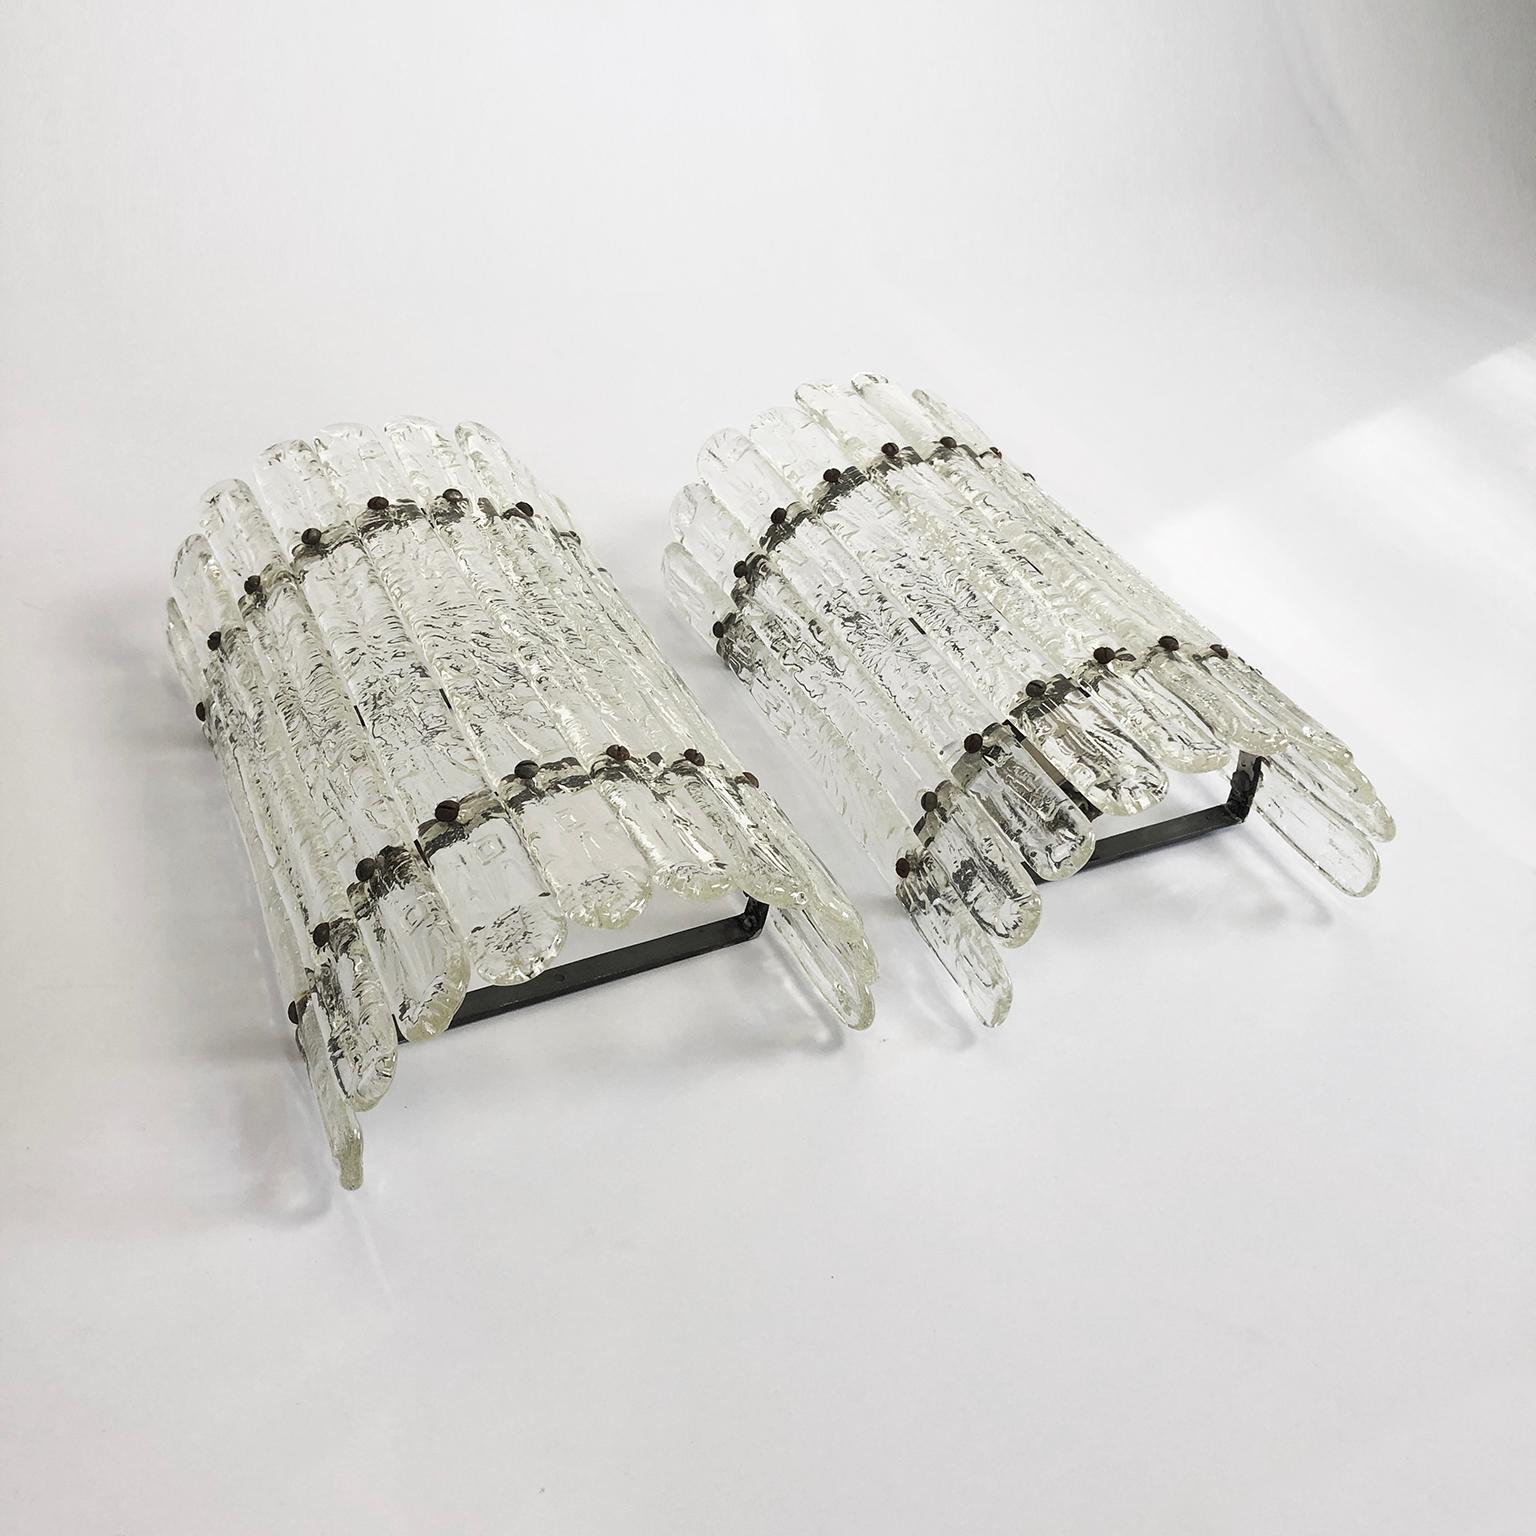 We offer this rare transparent pair of wall sconces designed by Felipe Delfinger, Feders, Cuernavaca, Mexico. Using recycled glass, circa 1970.